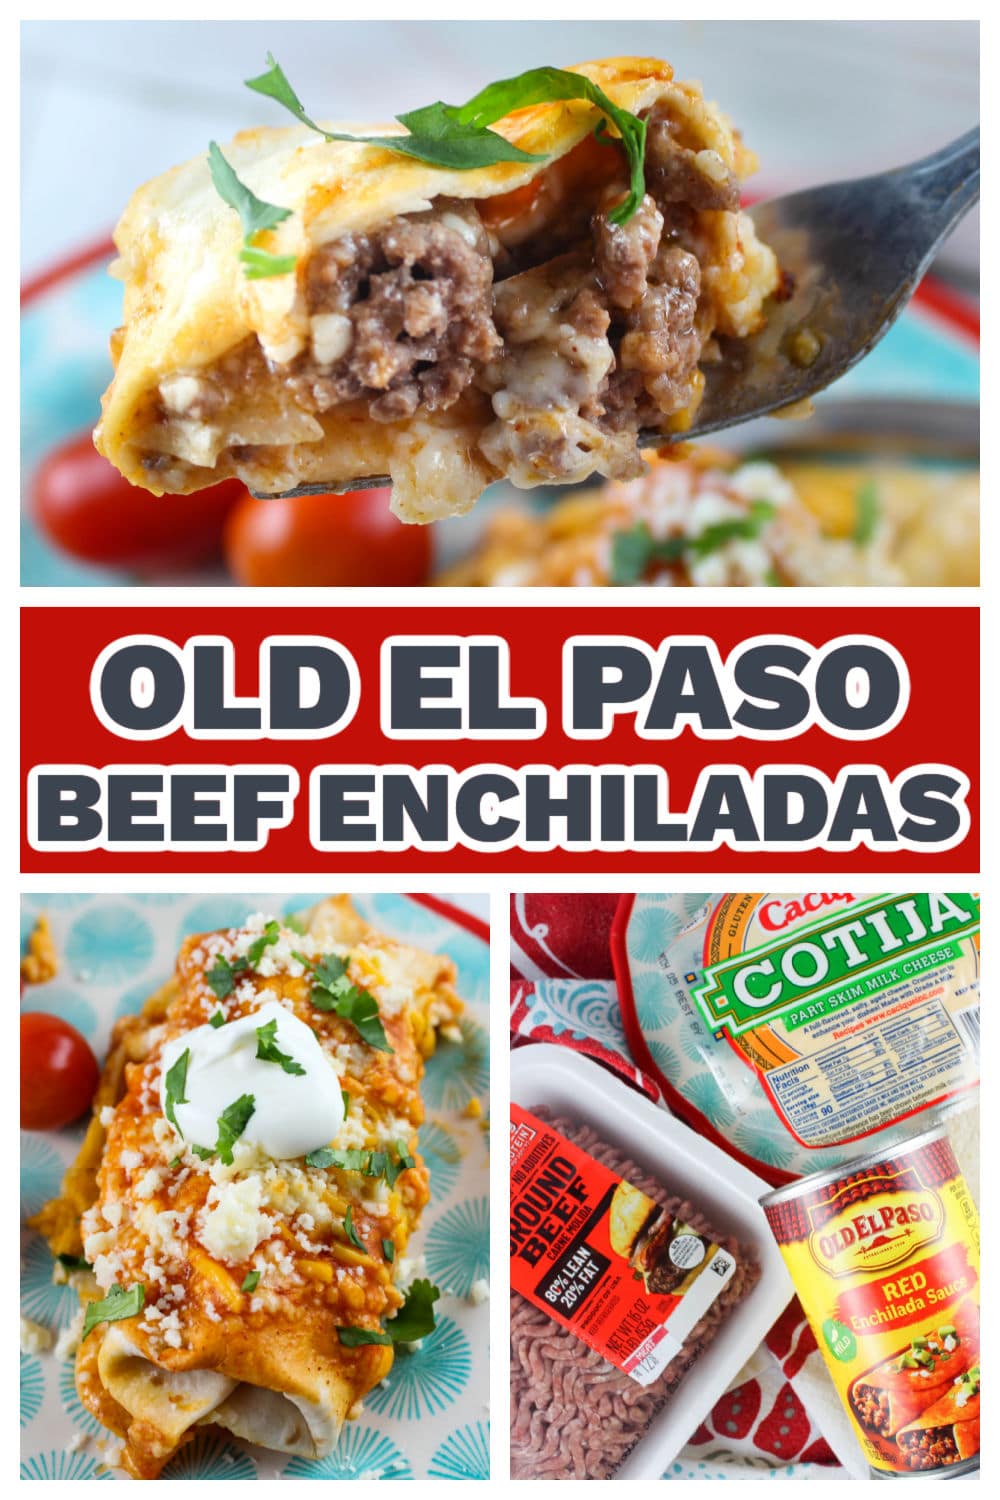 Sometimes the recipe on the package is just the best – and one of those cases is Old El Paso Beef Enchiladas. With just five ingredients - anybody in the family can make this cheesy, meaty and EASY beef enchiladas recipe! via @foodhussy